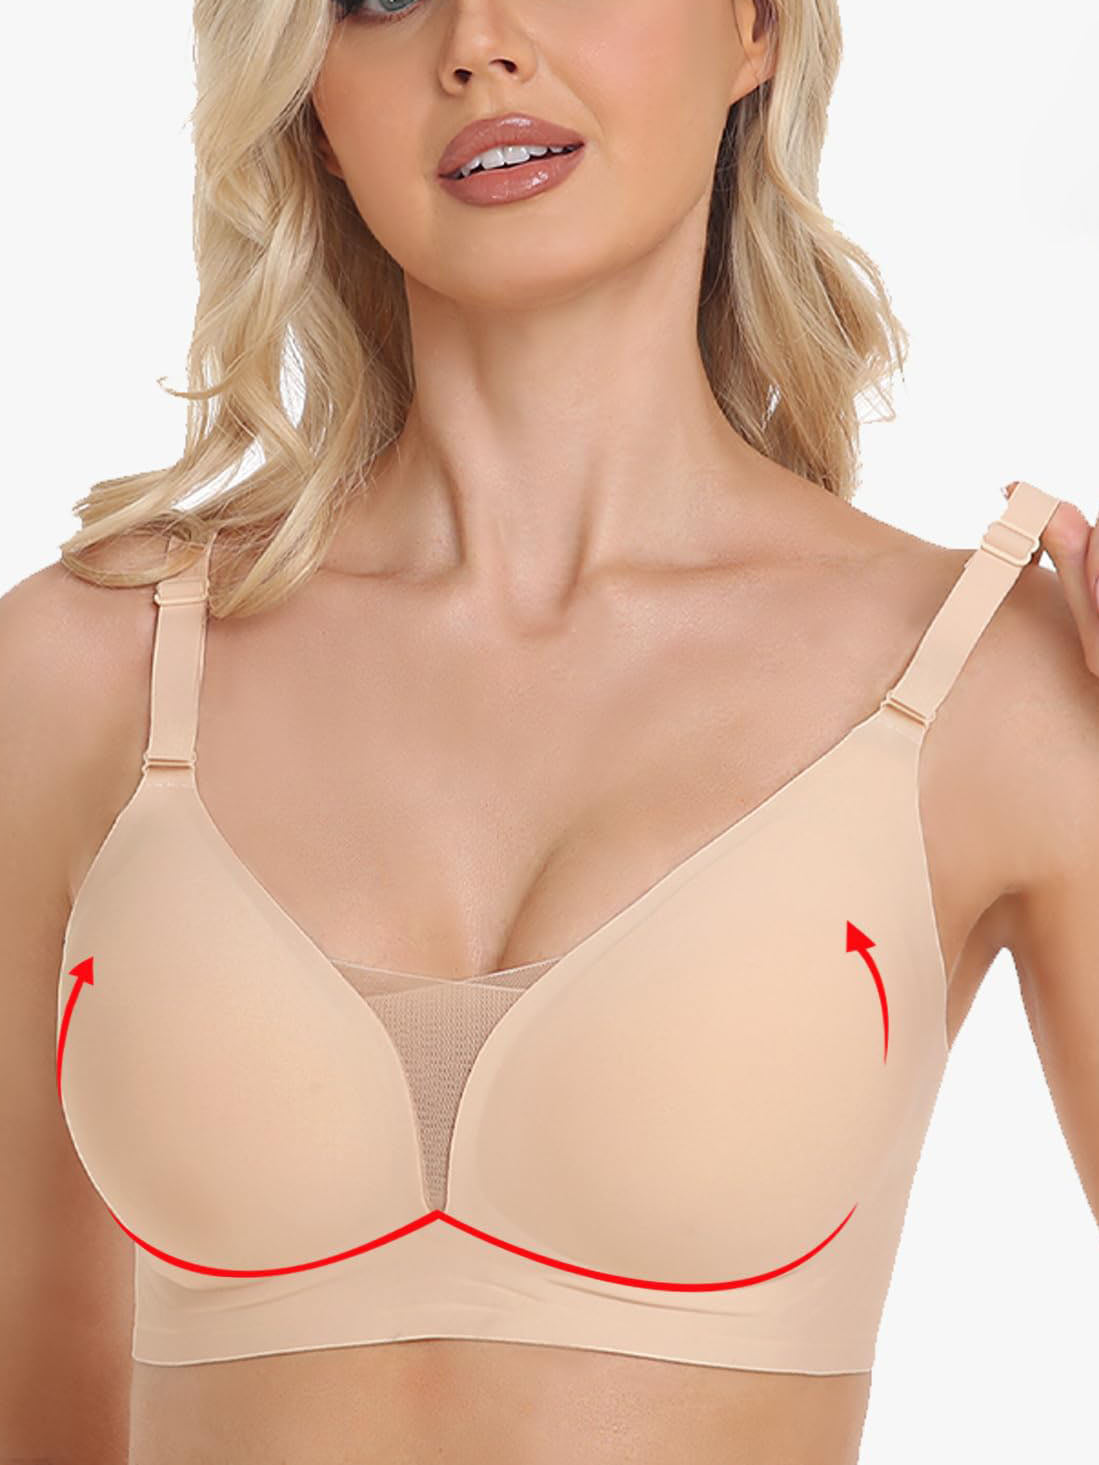 Mesh Bras for Women No Underwire Wireless Comfort Lift Push Up Bralettes for Women with Support and Bra Cornsilk